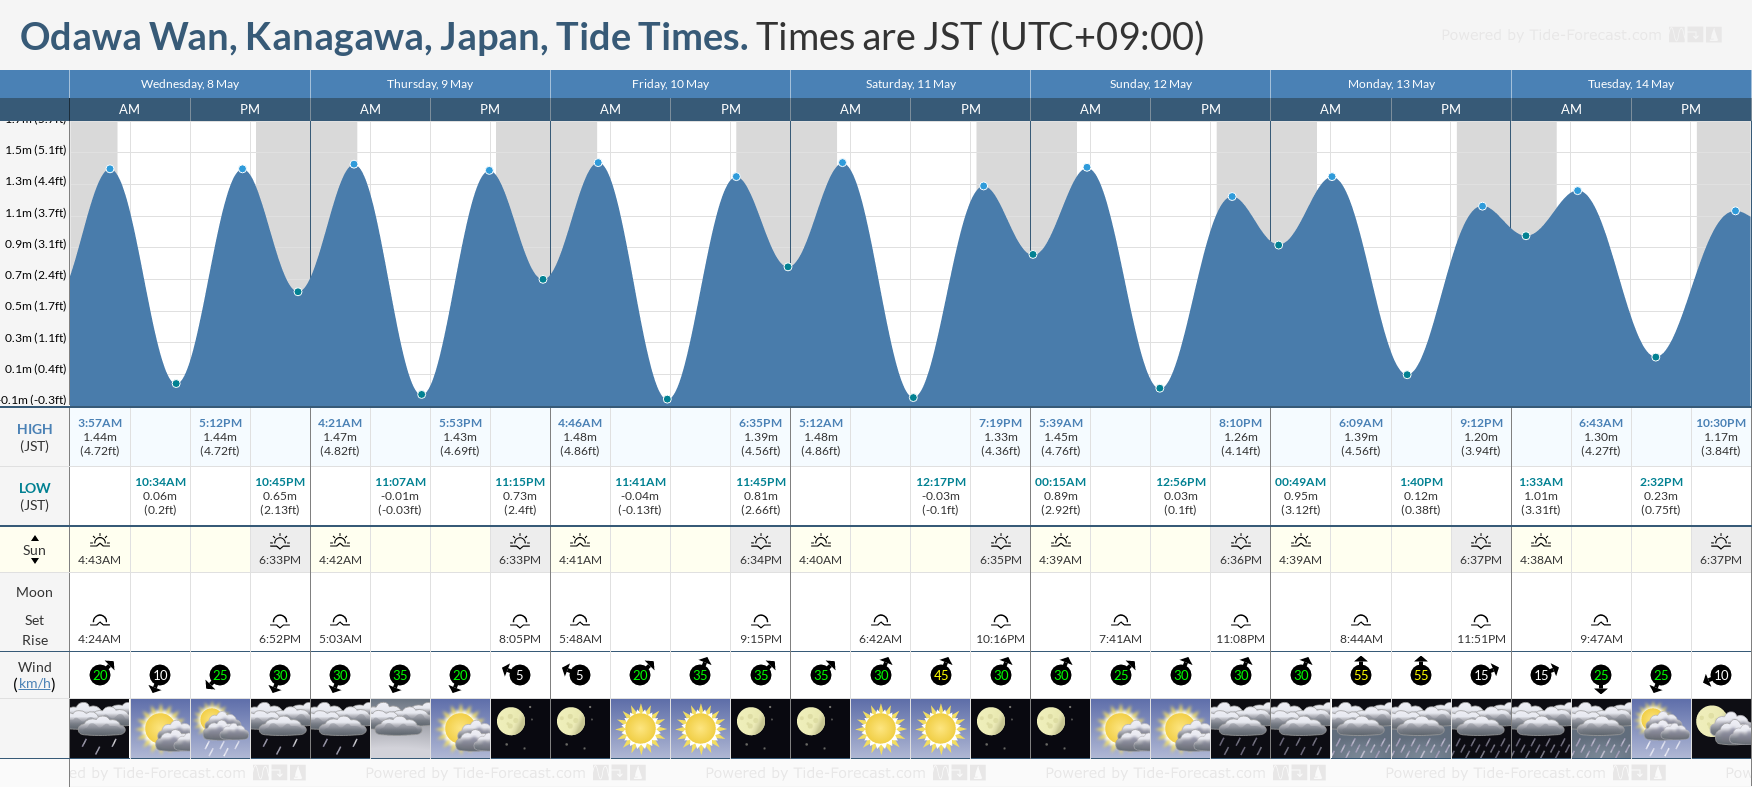 Odawa Wan, Kanagawa, Japan Tide Chart including high and low tide tide times for the next 7 days